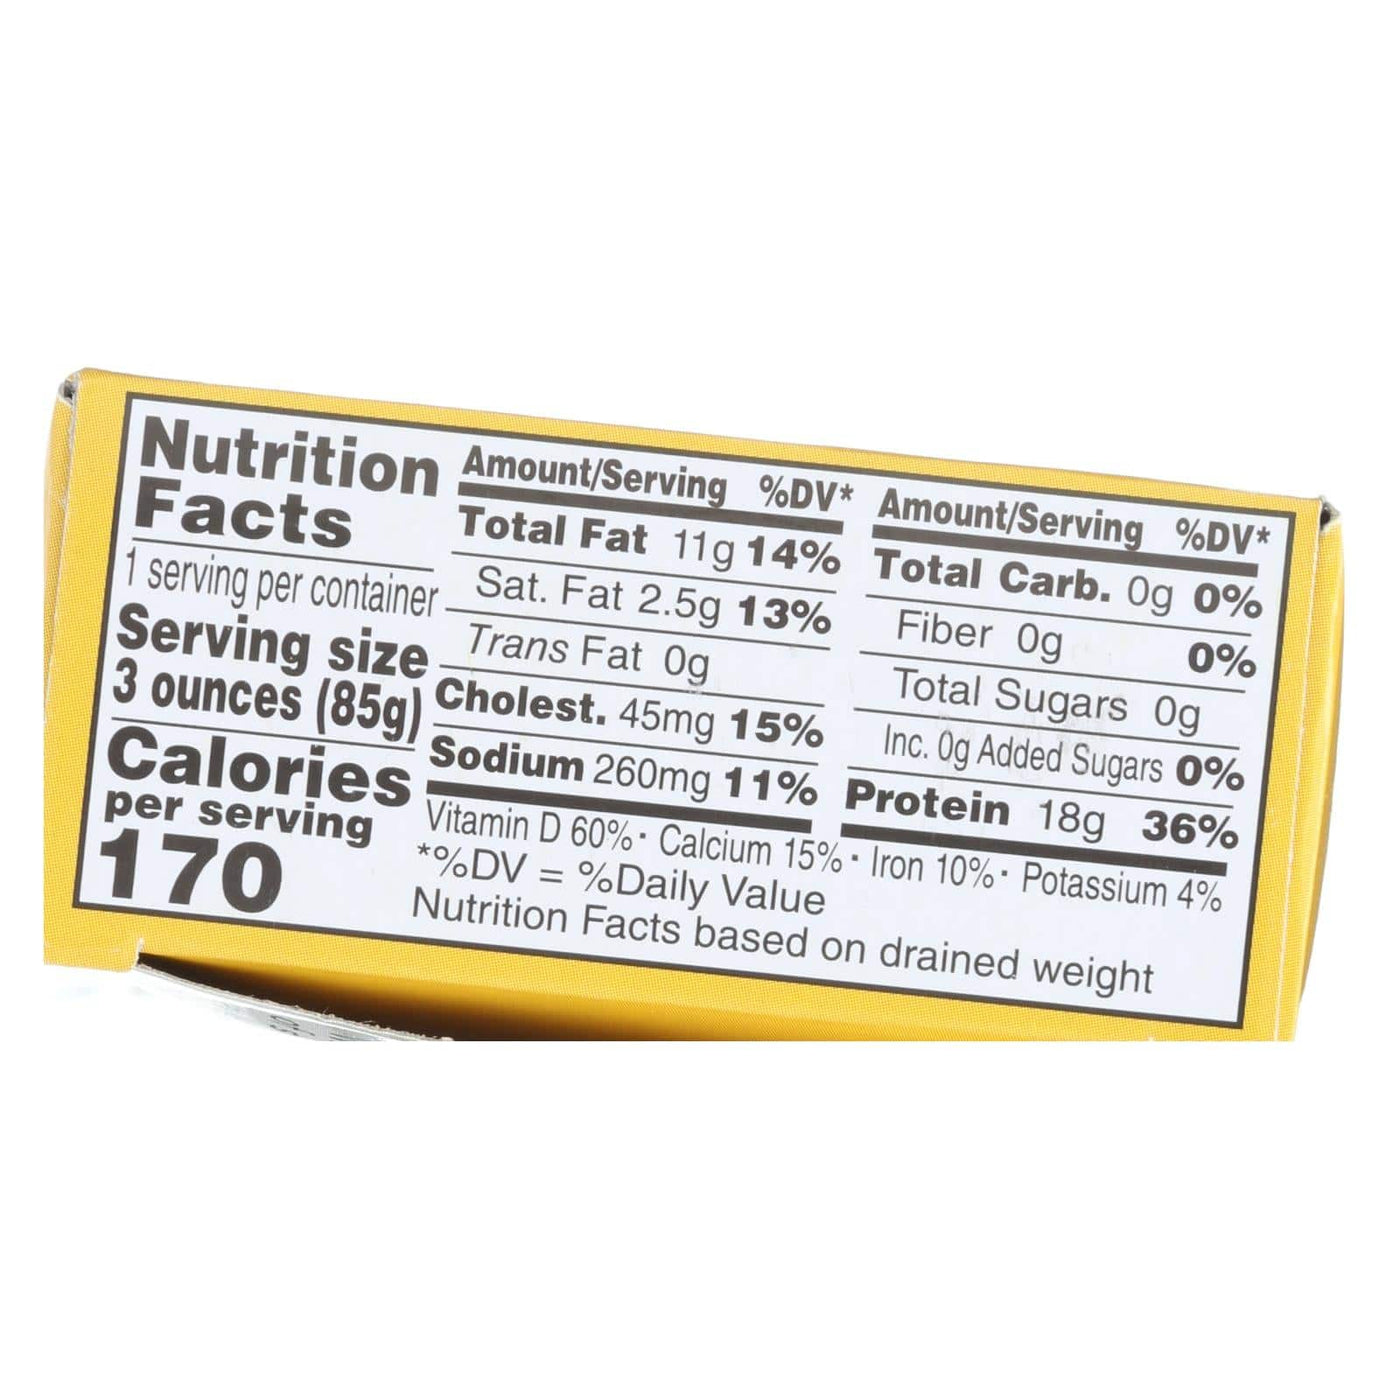 Buy Wild Planet Sardines In Oil - Lemon - Case Of 12 - 4.375 Oz.  at OnlyNaturals.us